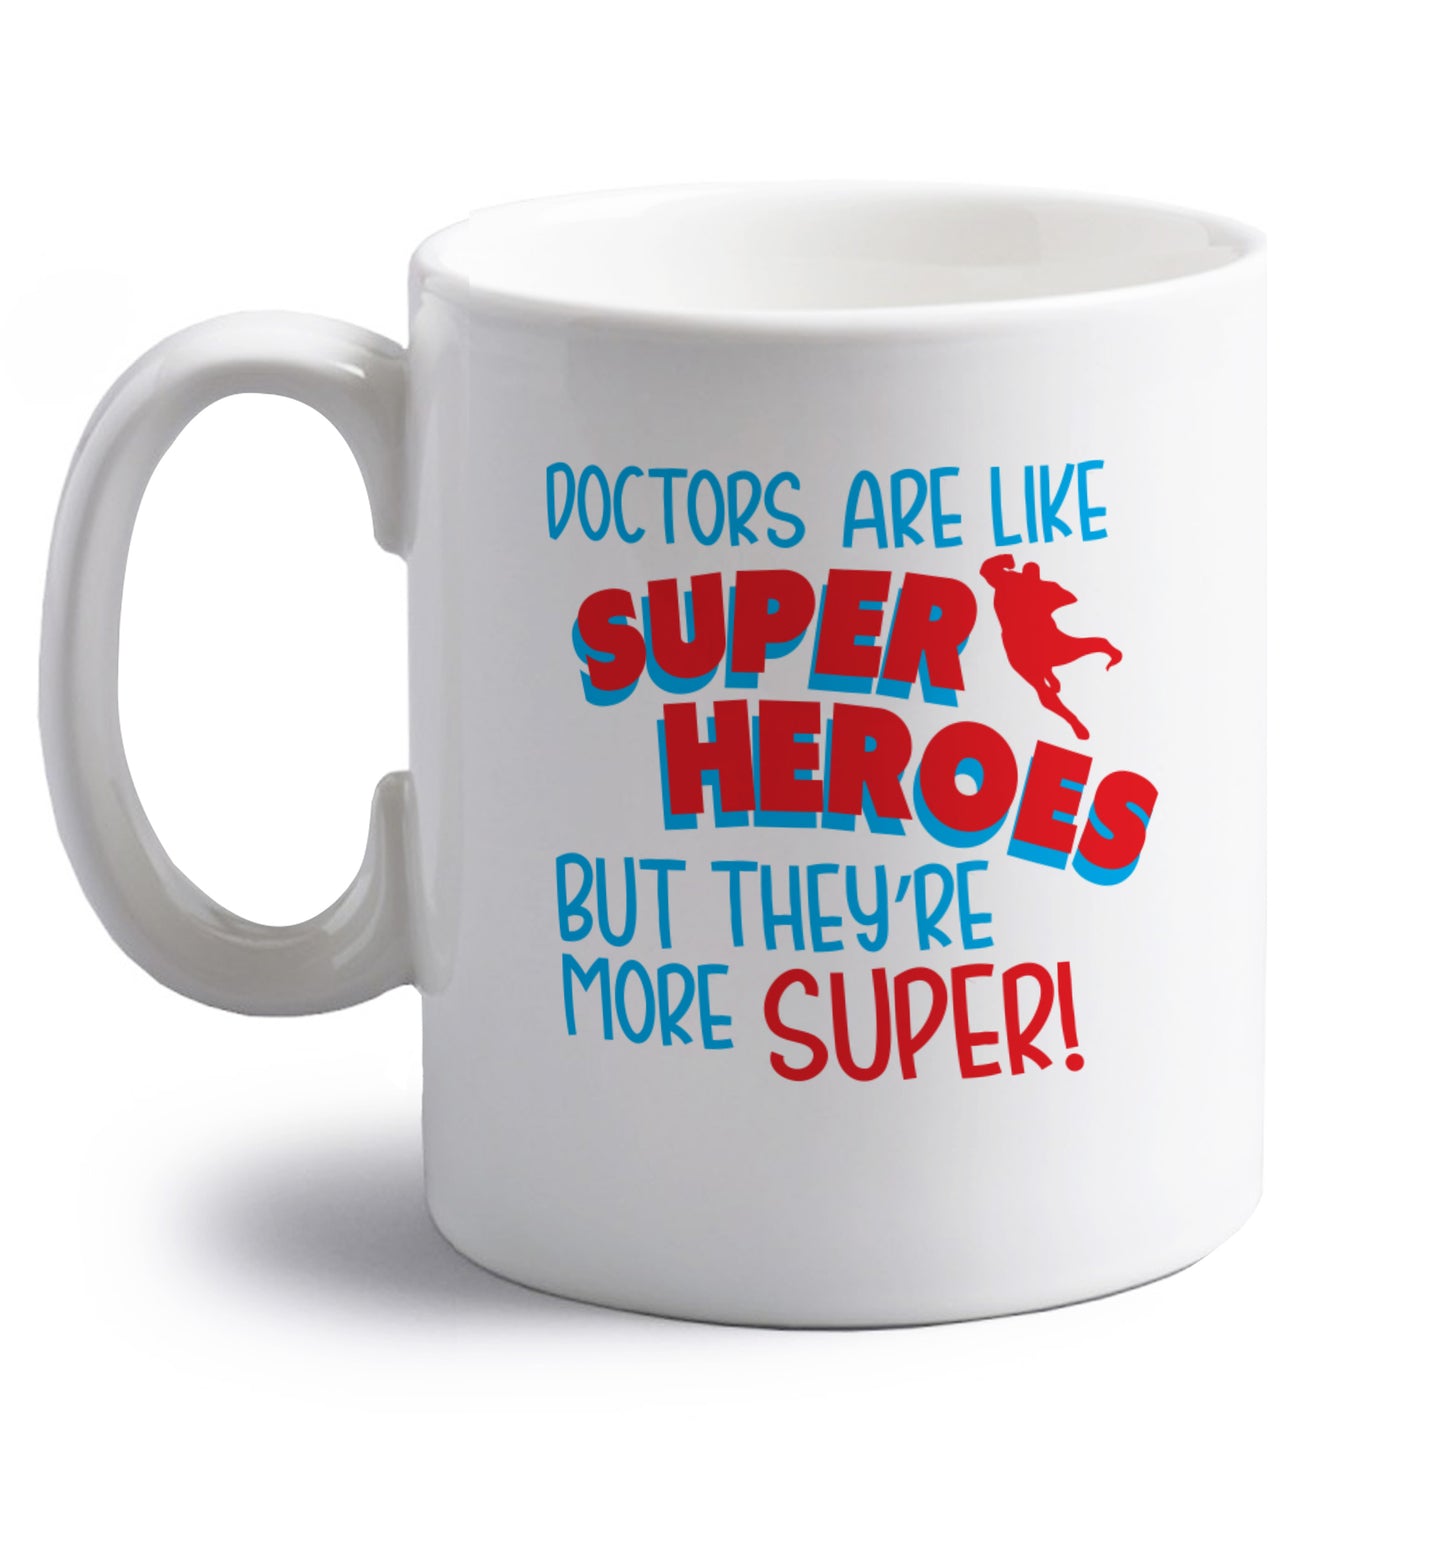 Doctors are like superheros but they're more super right handed white ceramic mug 